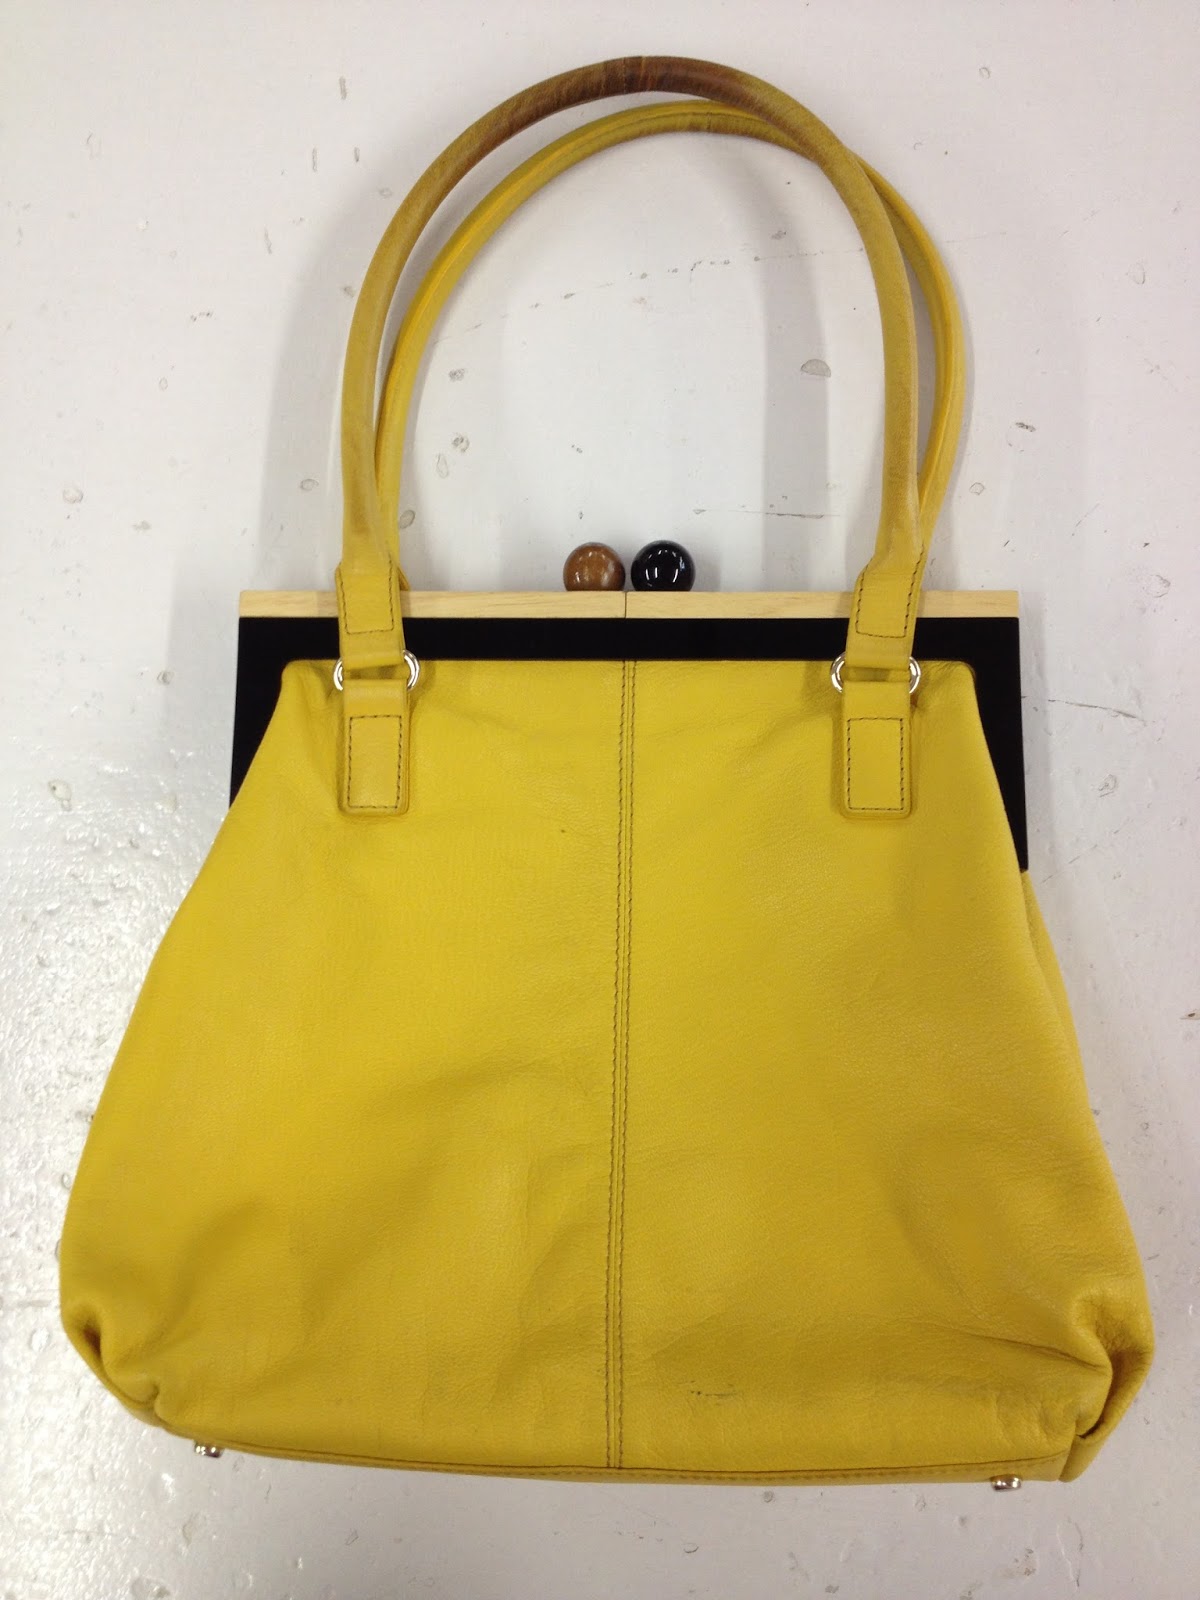 Leather Cleaning, Re-dyeing and Restoration: Kate Spade Handbag Restoration